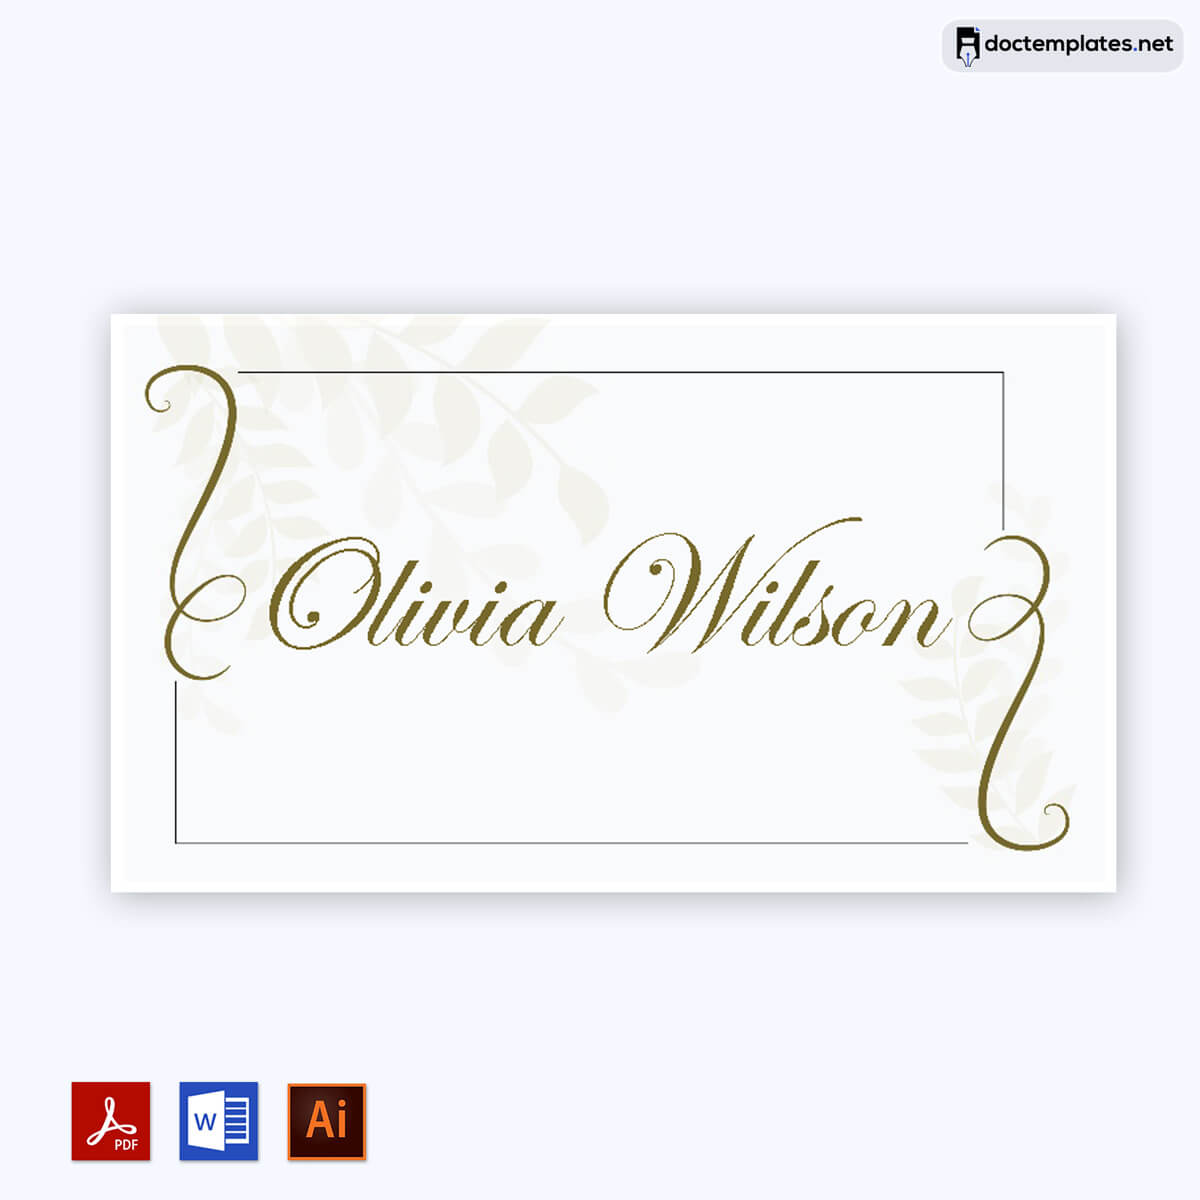 Image of School name tag template free download
School name tag template free download
